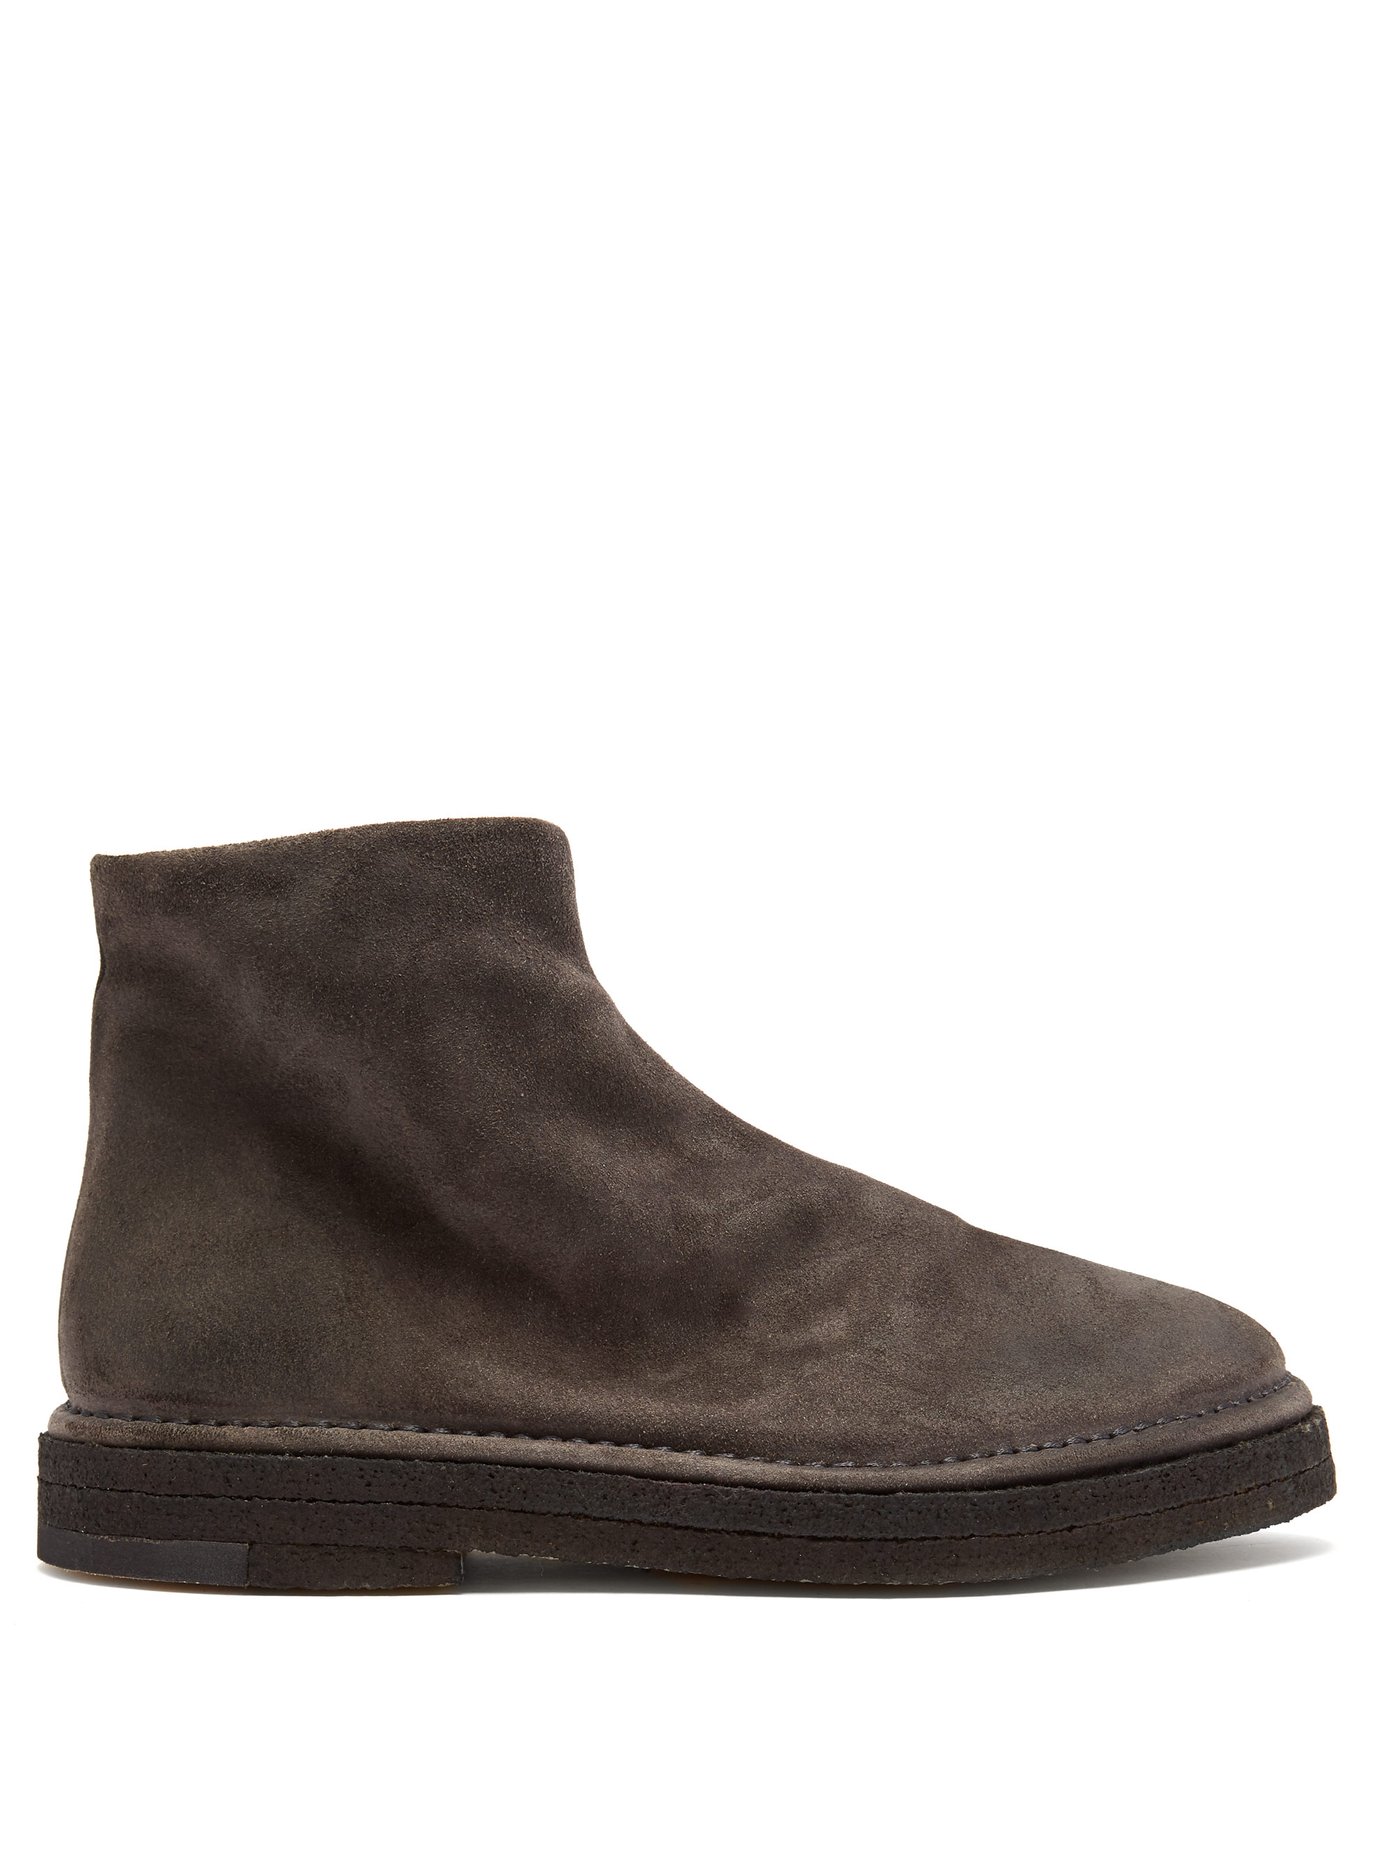 chelsea boots next day delivery